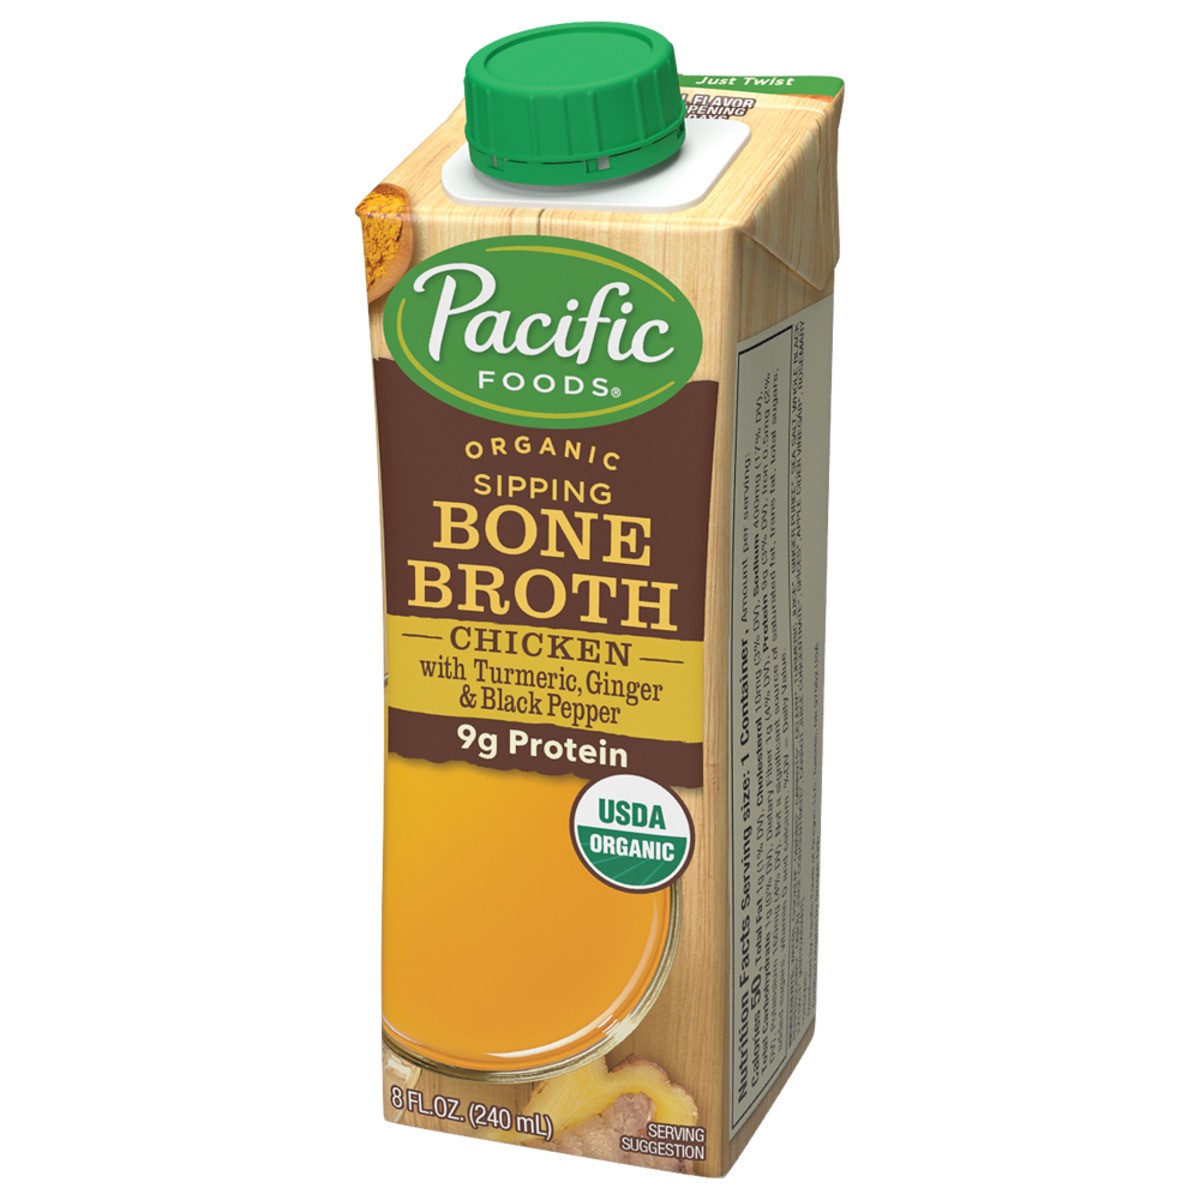 slide 6 of 8, Pacific Foods Organic Chicken Bone Broth with Turmeric, Ginger, & Black Pepper, 8oz, 8 oz